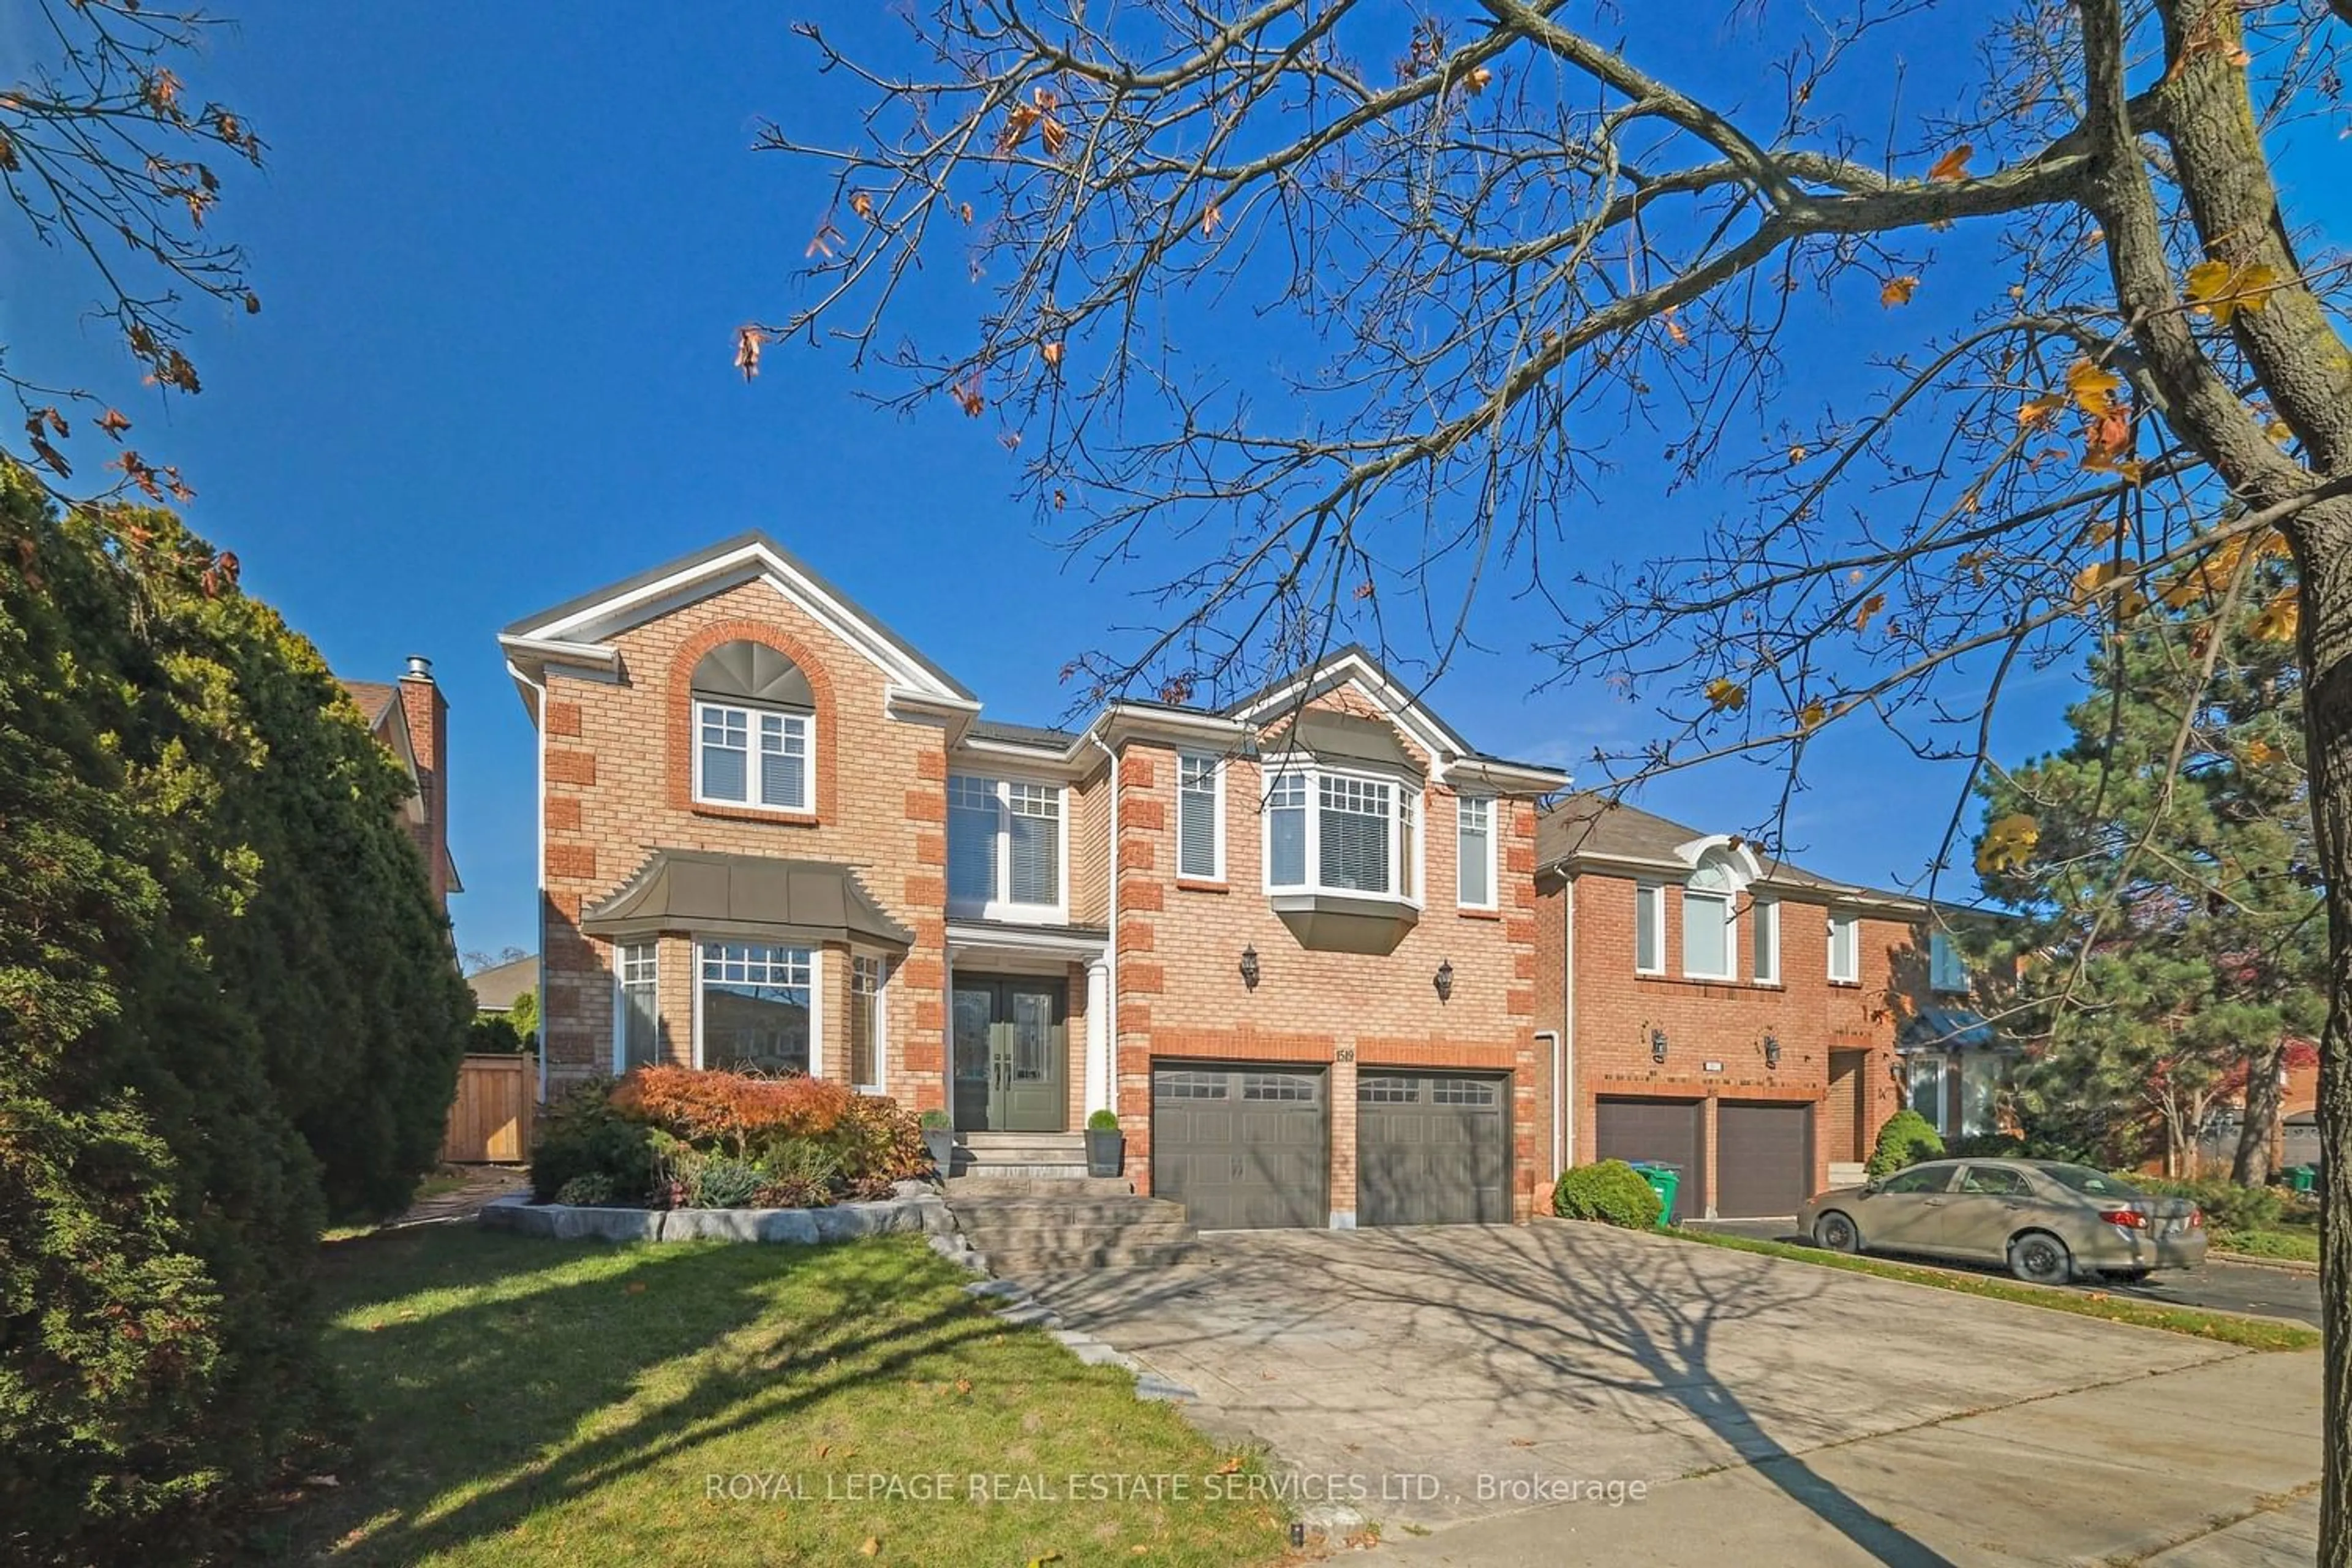 Home with brick exterior material for 1519 Ballantrae Dr, Mississauga Ontario L5M 3N4